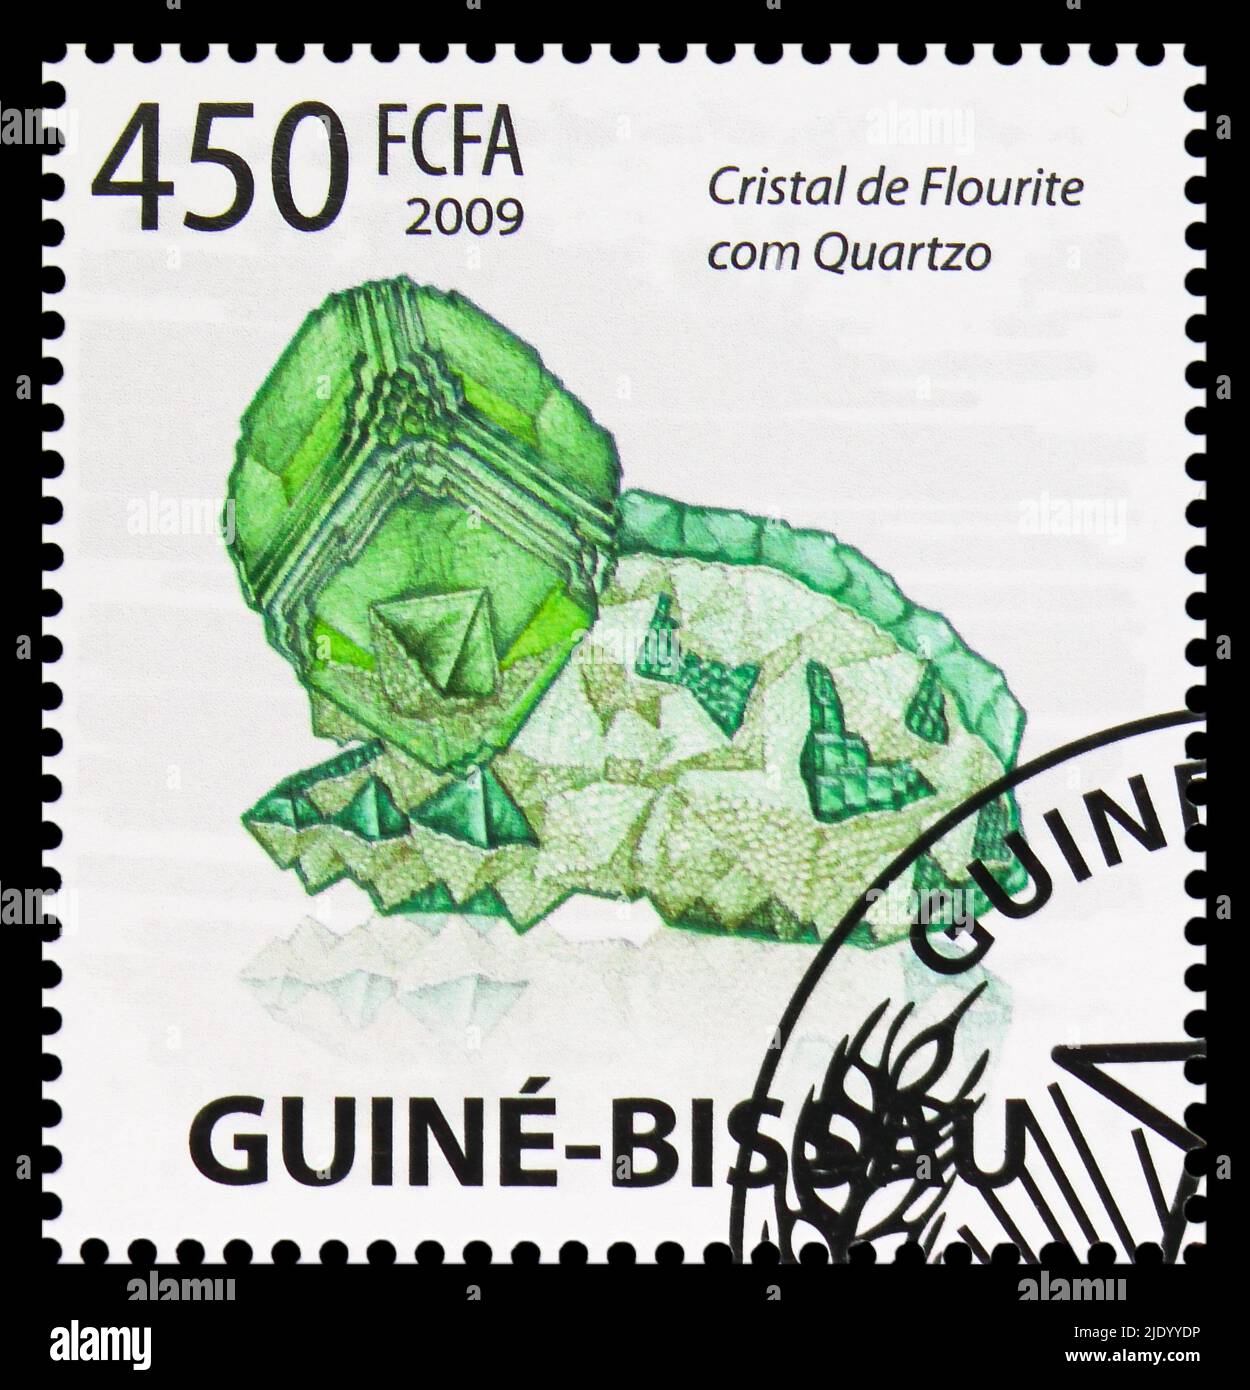 MOSCOW, RUSSIA - JUNE 17, 2022: Postage stamp printed in Guinea-Bissau shows Flourite Crystal with Quartz, Minerals serie, circa 2009 Stock Photo